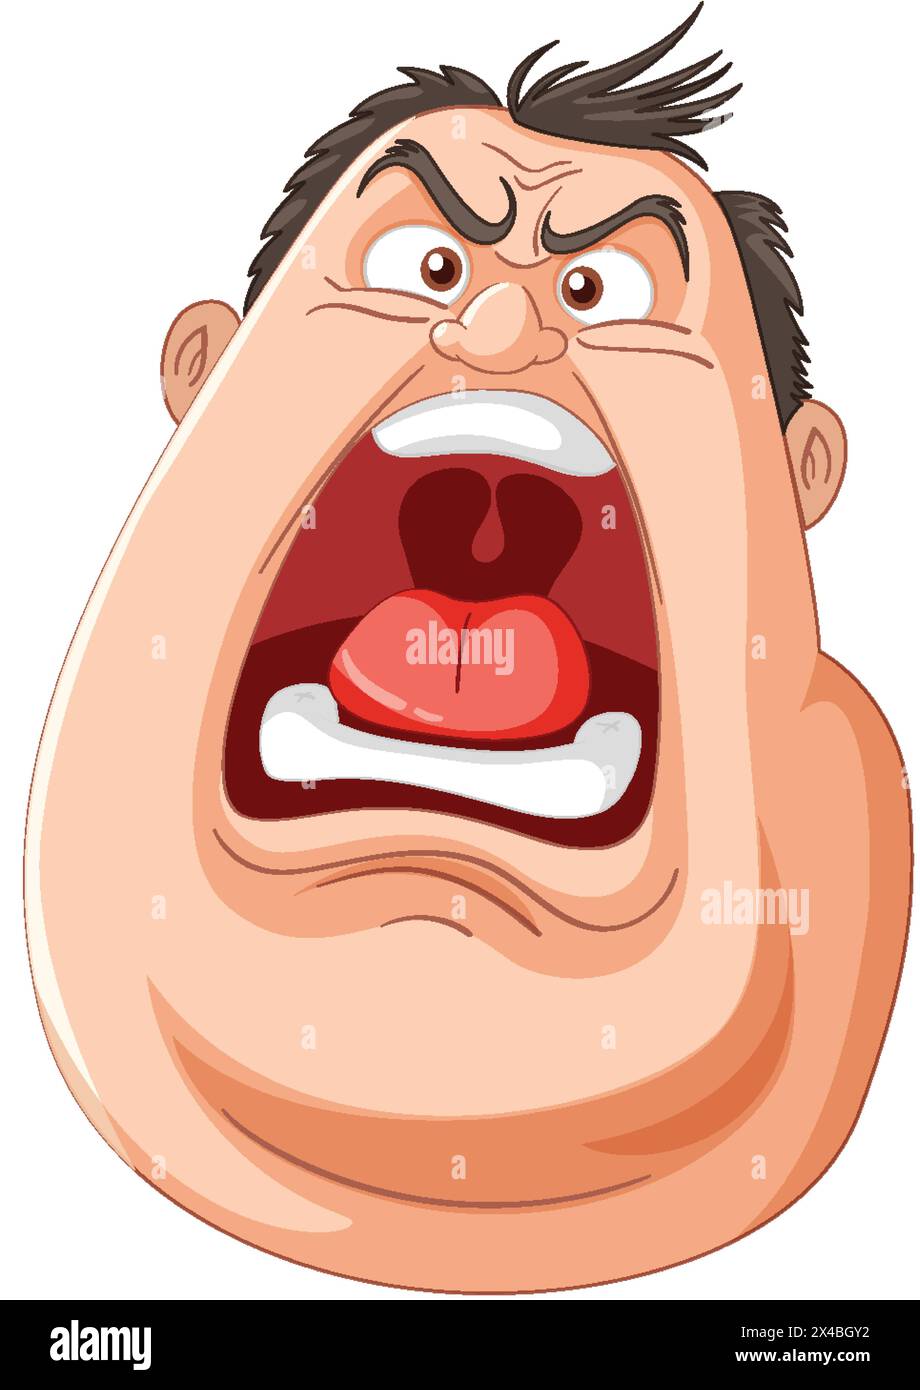 Cartoon of a man yelling with exaggerated features. Stock Vector